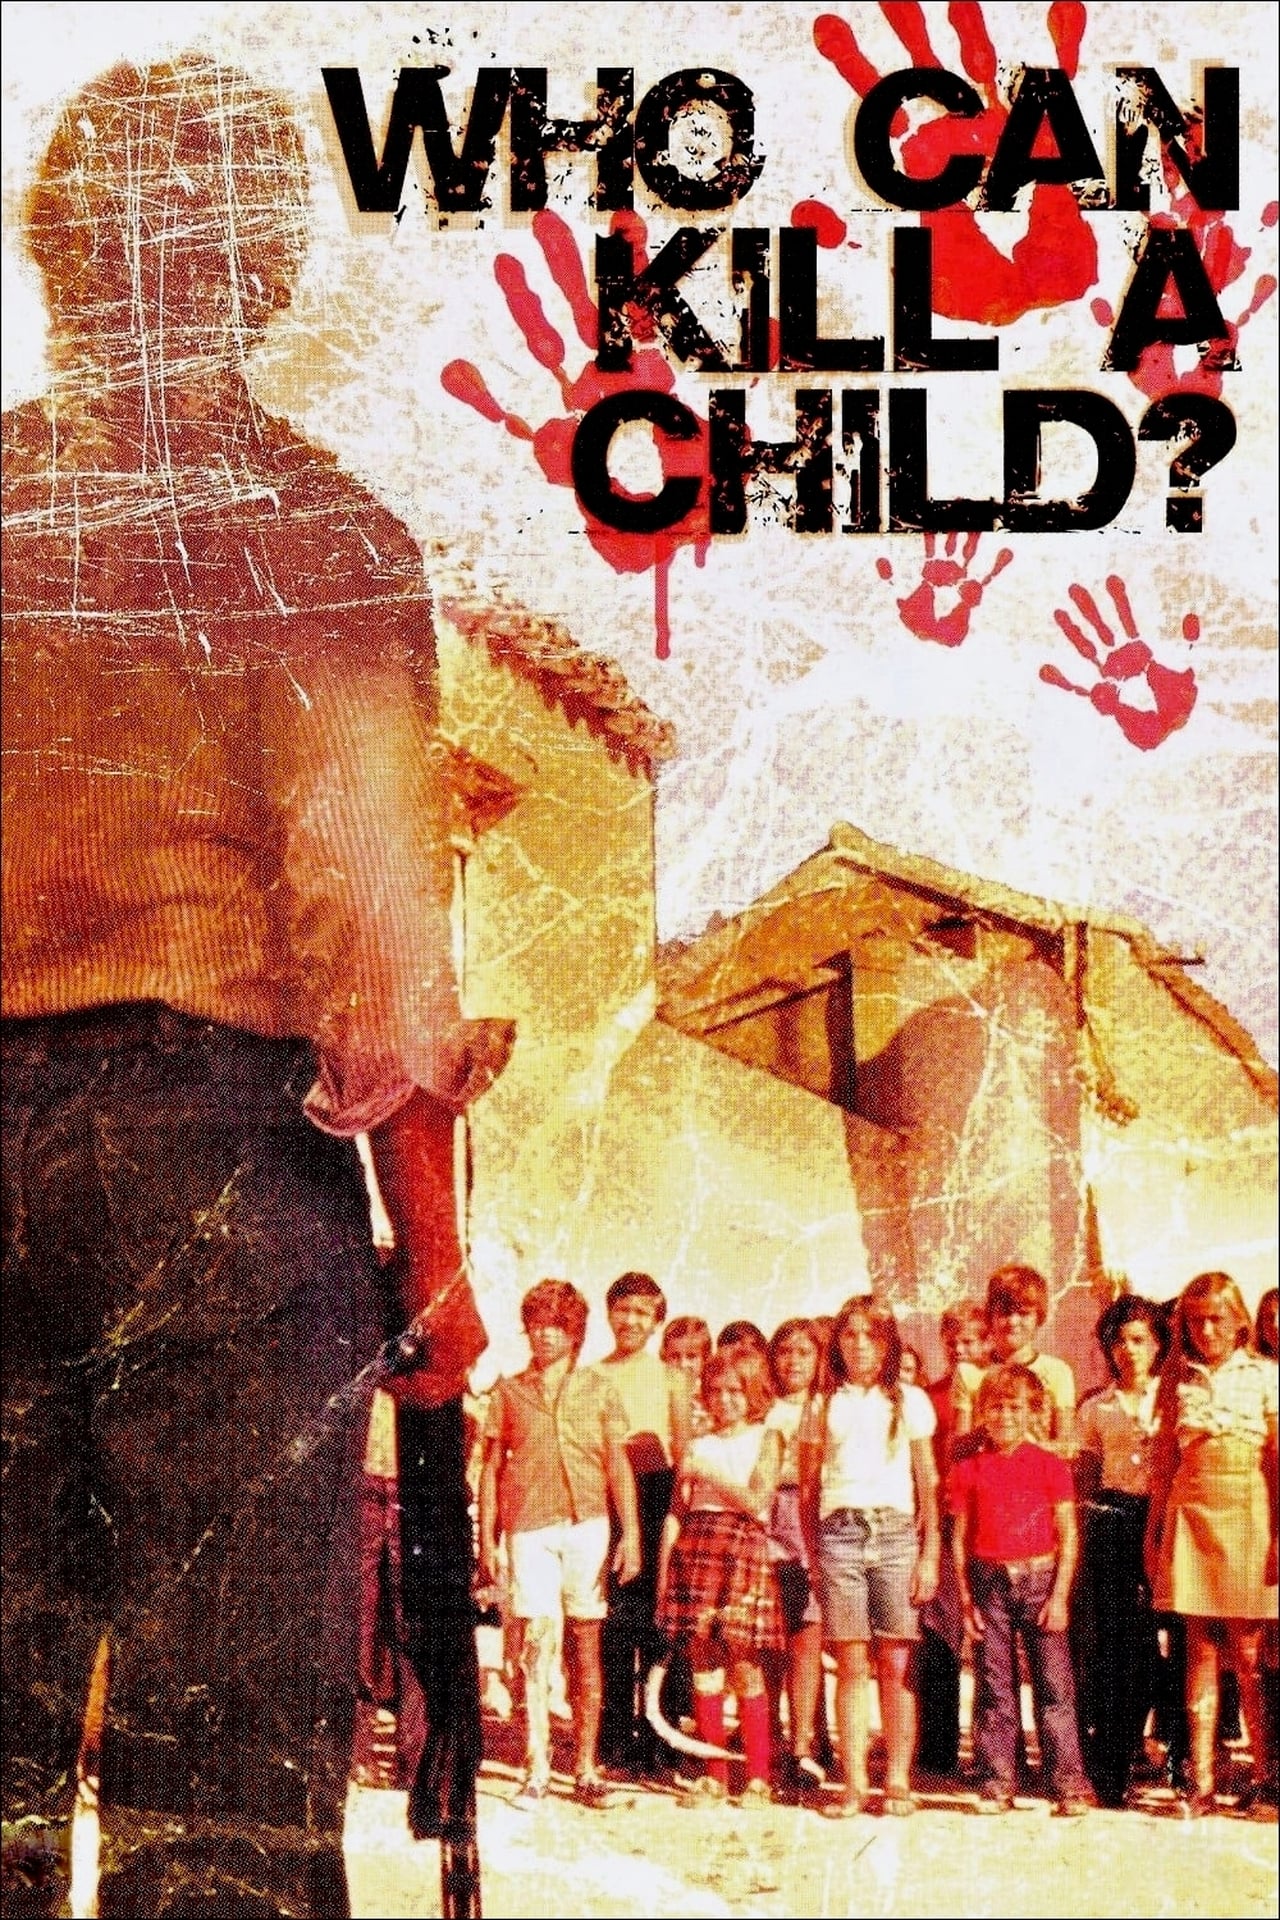 Who Can Kill a Child? poster